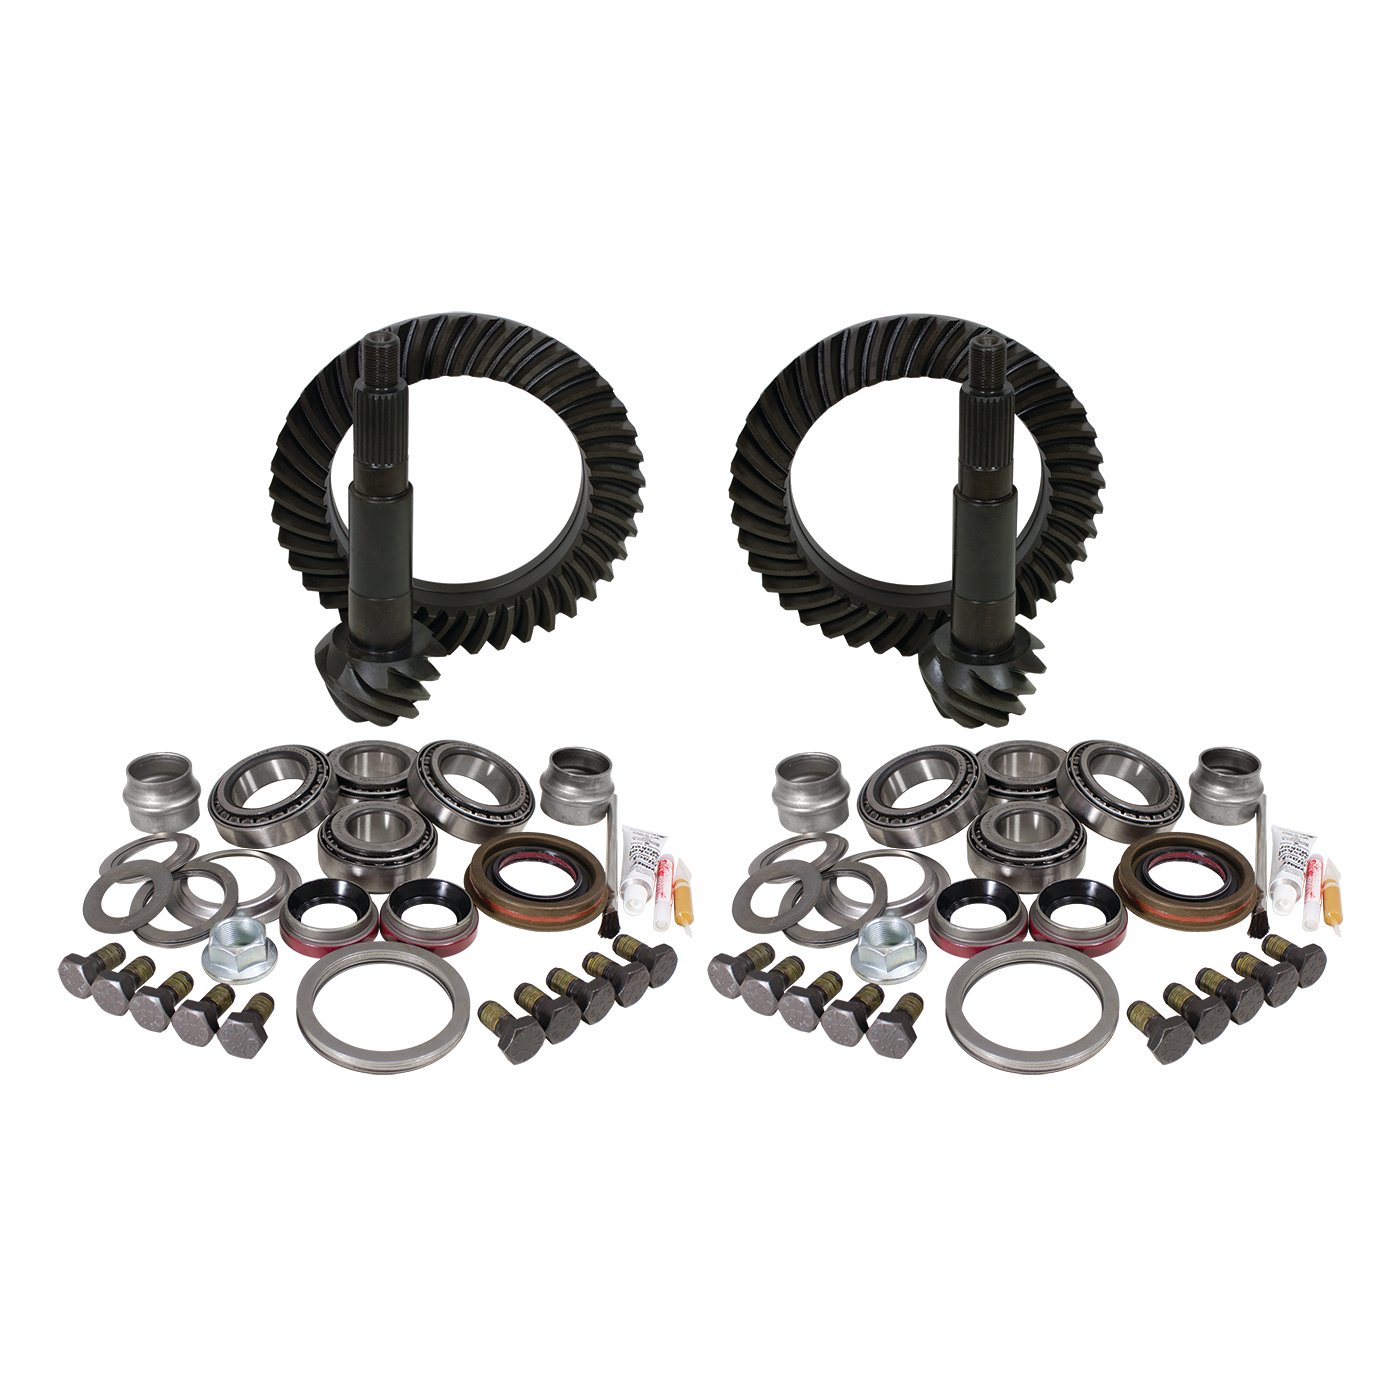 USA Standard ZGK009 Gear & Install Kit Package, For Jeep Tj Rubicon, 4.56 Ratio